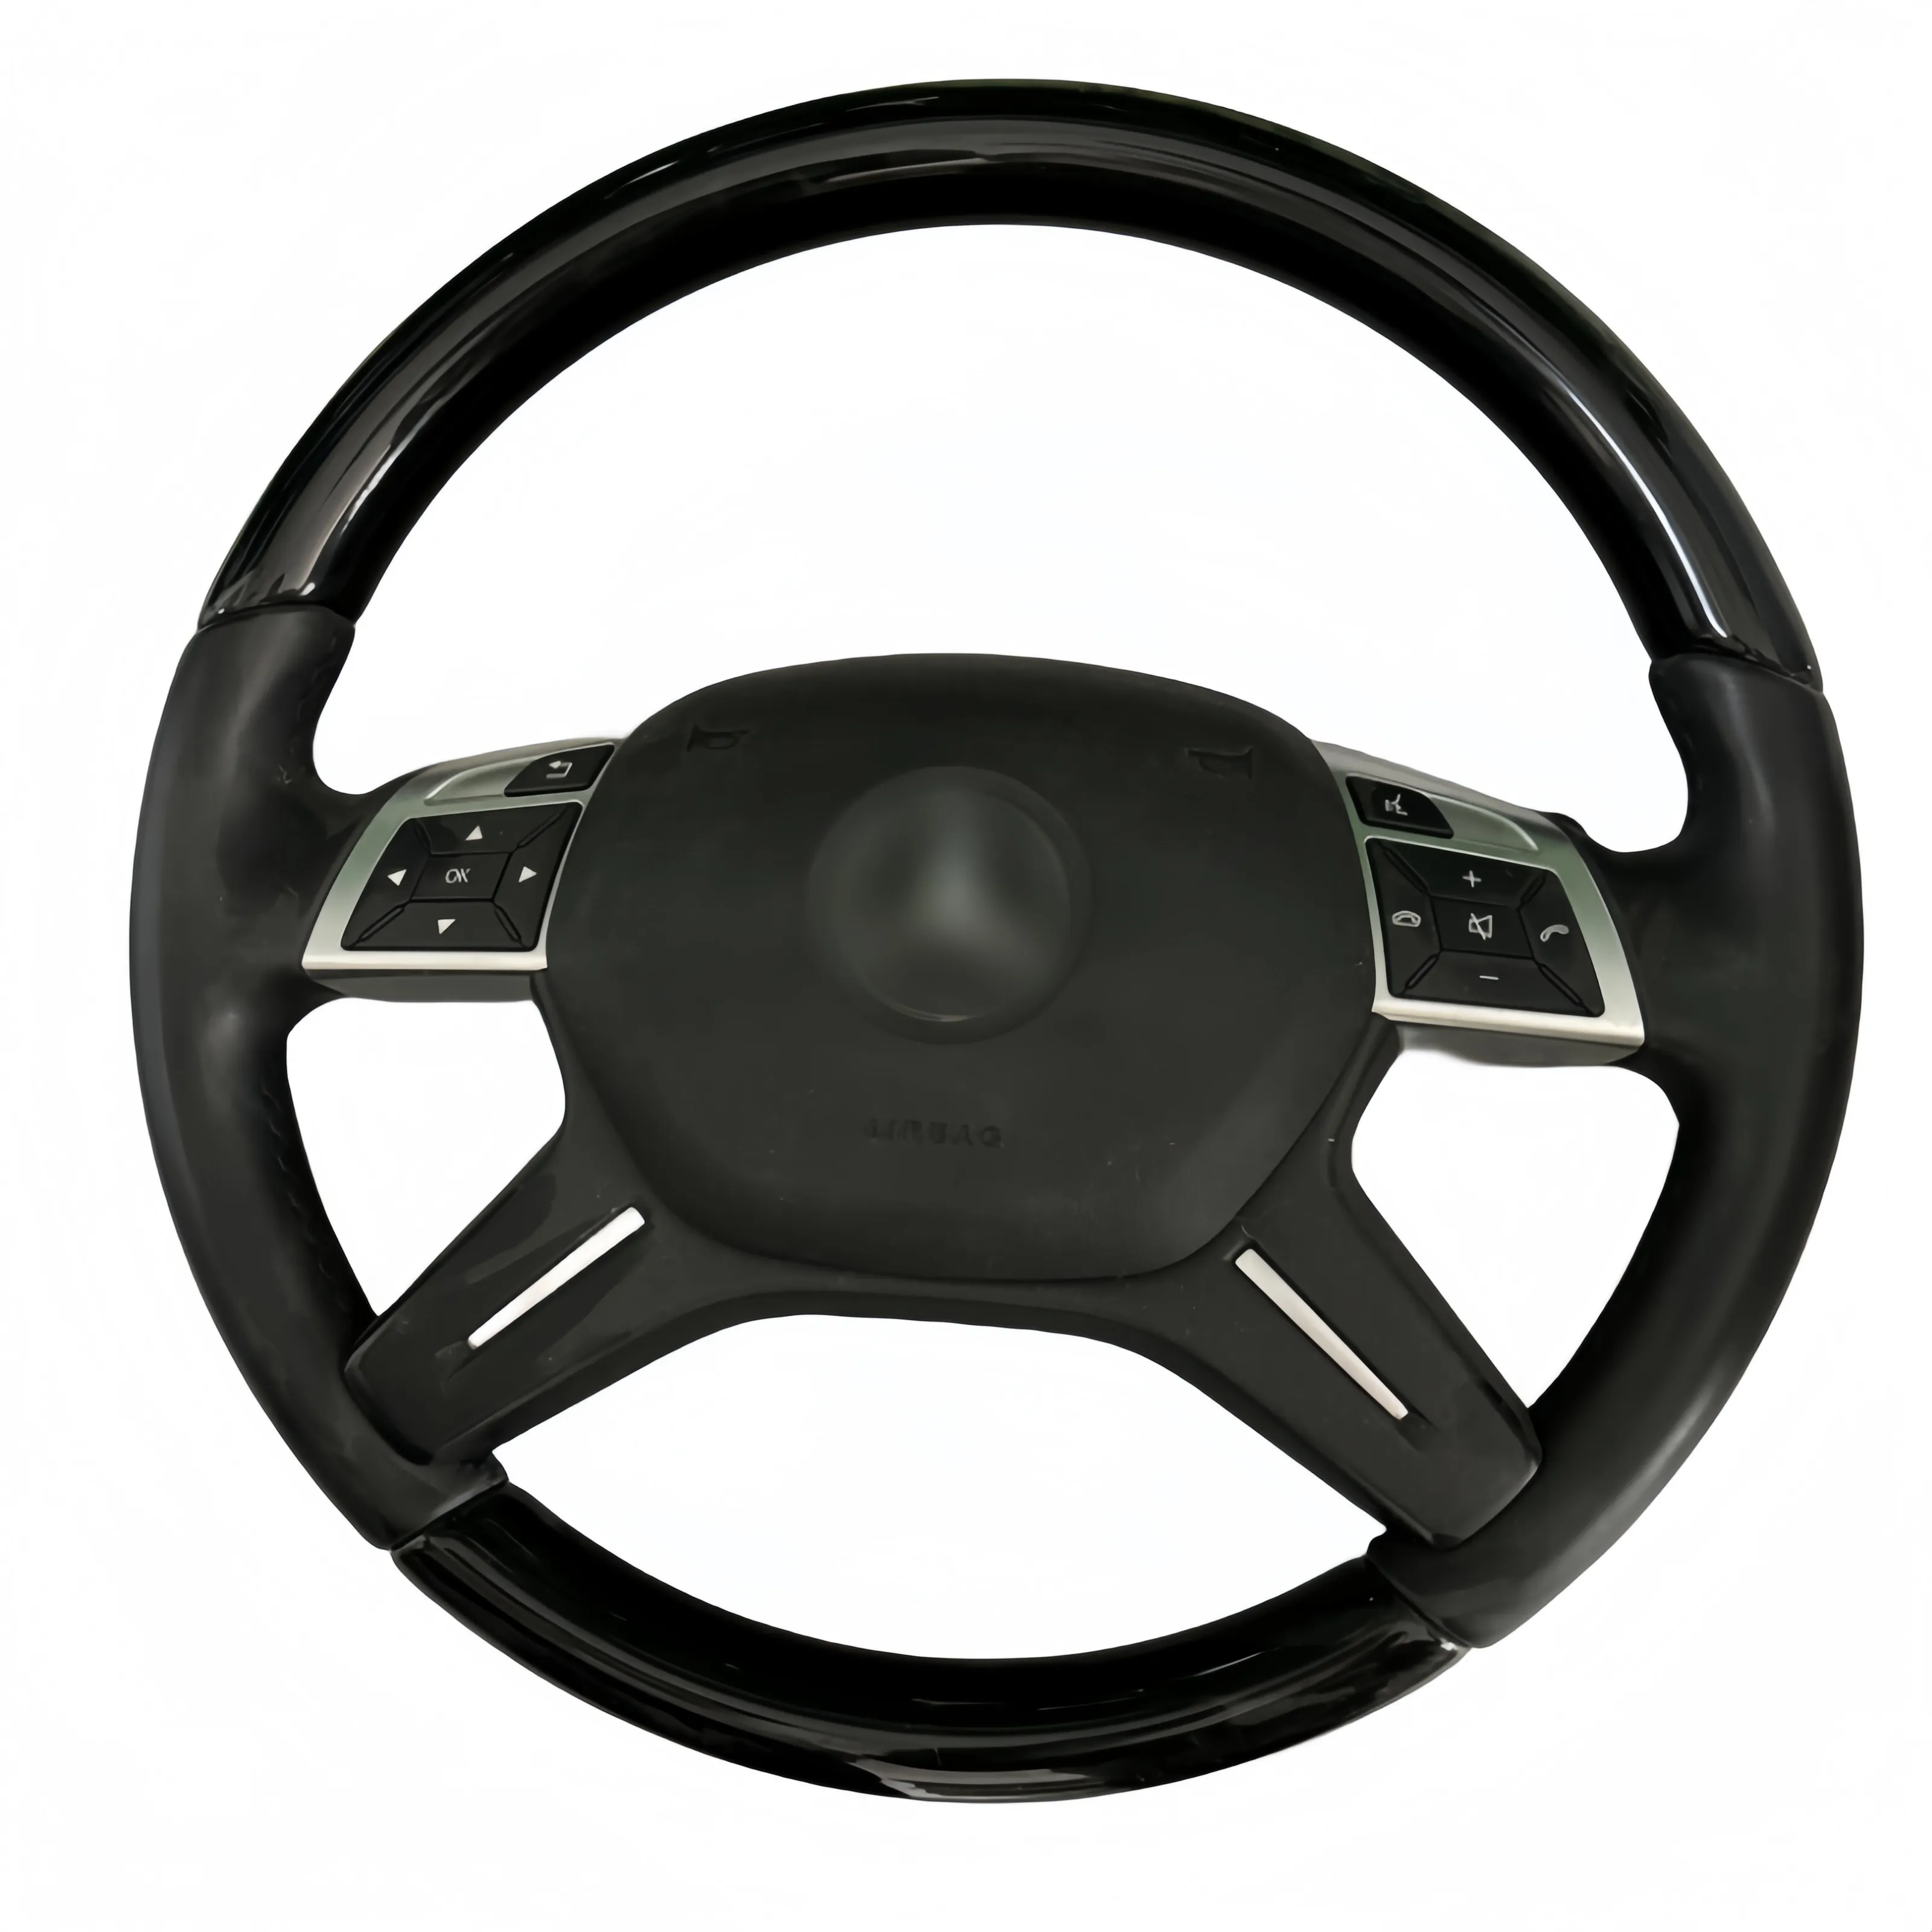 Suitable for Mercedes-Benz S-Class W221 upgraded mahogany steering wheelfull system upgrade